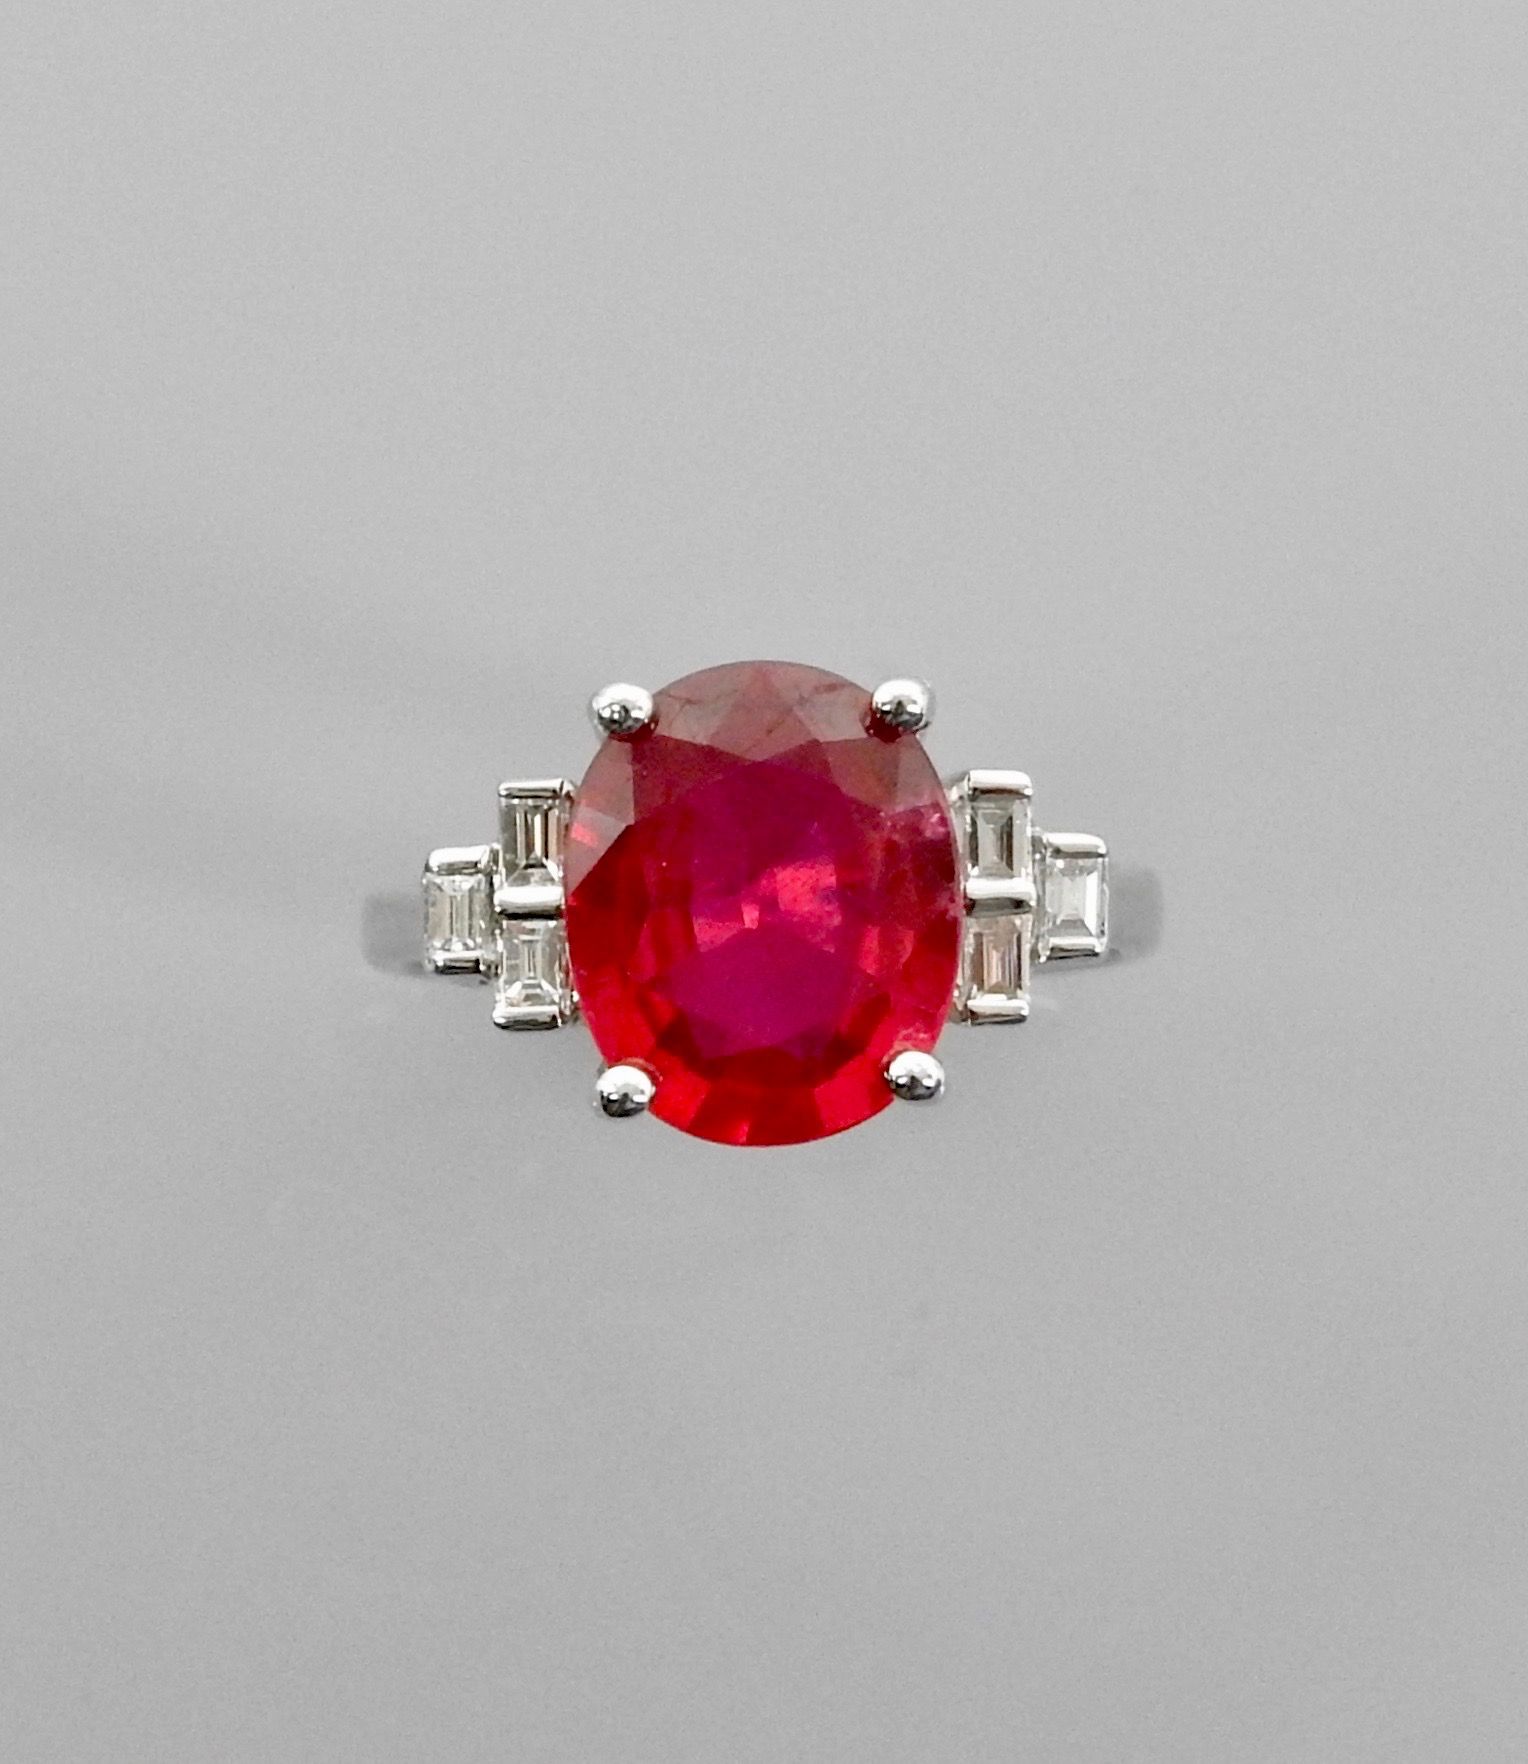 Null White gold ring, 750 MM, set with a treated ruby weighing about 4 carats an&hellip;